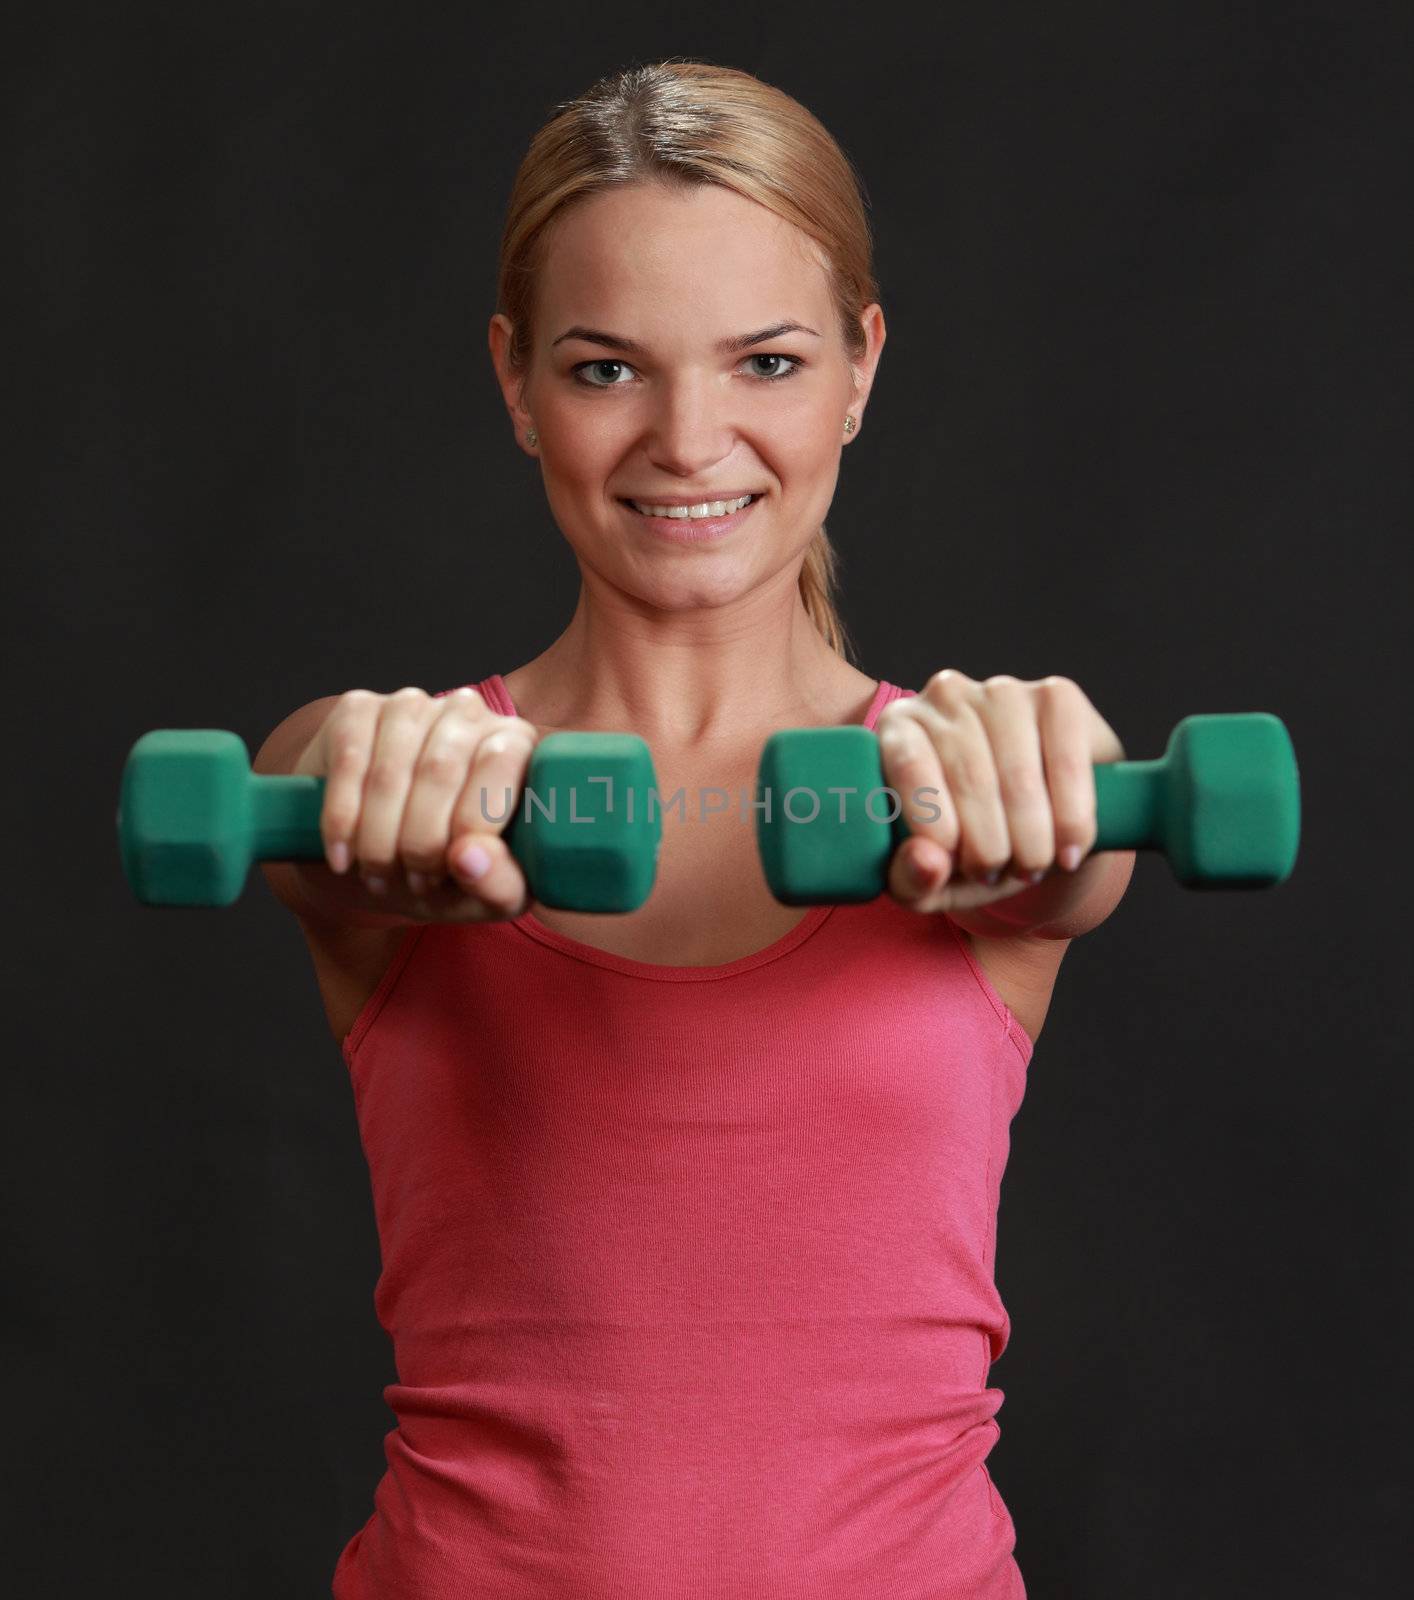 Portrait of a young blonde woman doing exercise with dumbbellsagainst a black background.